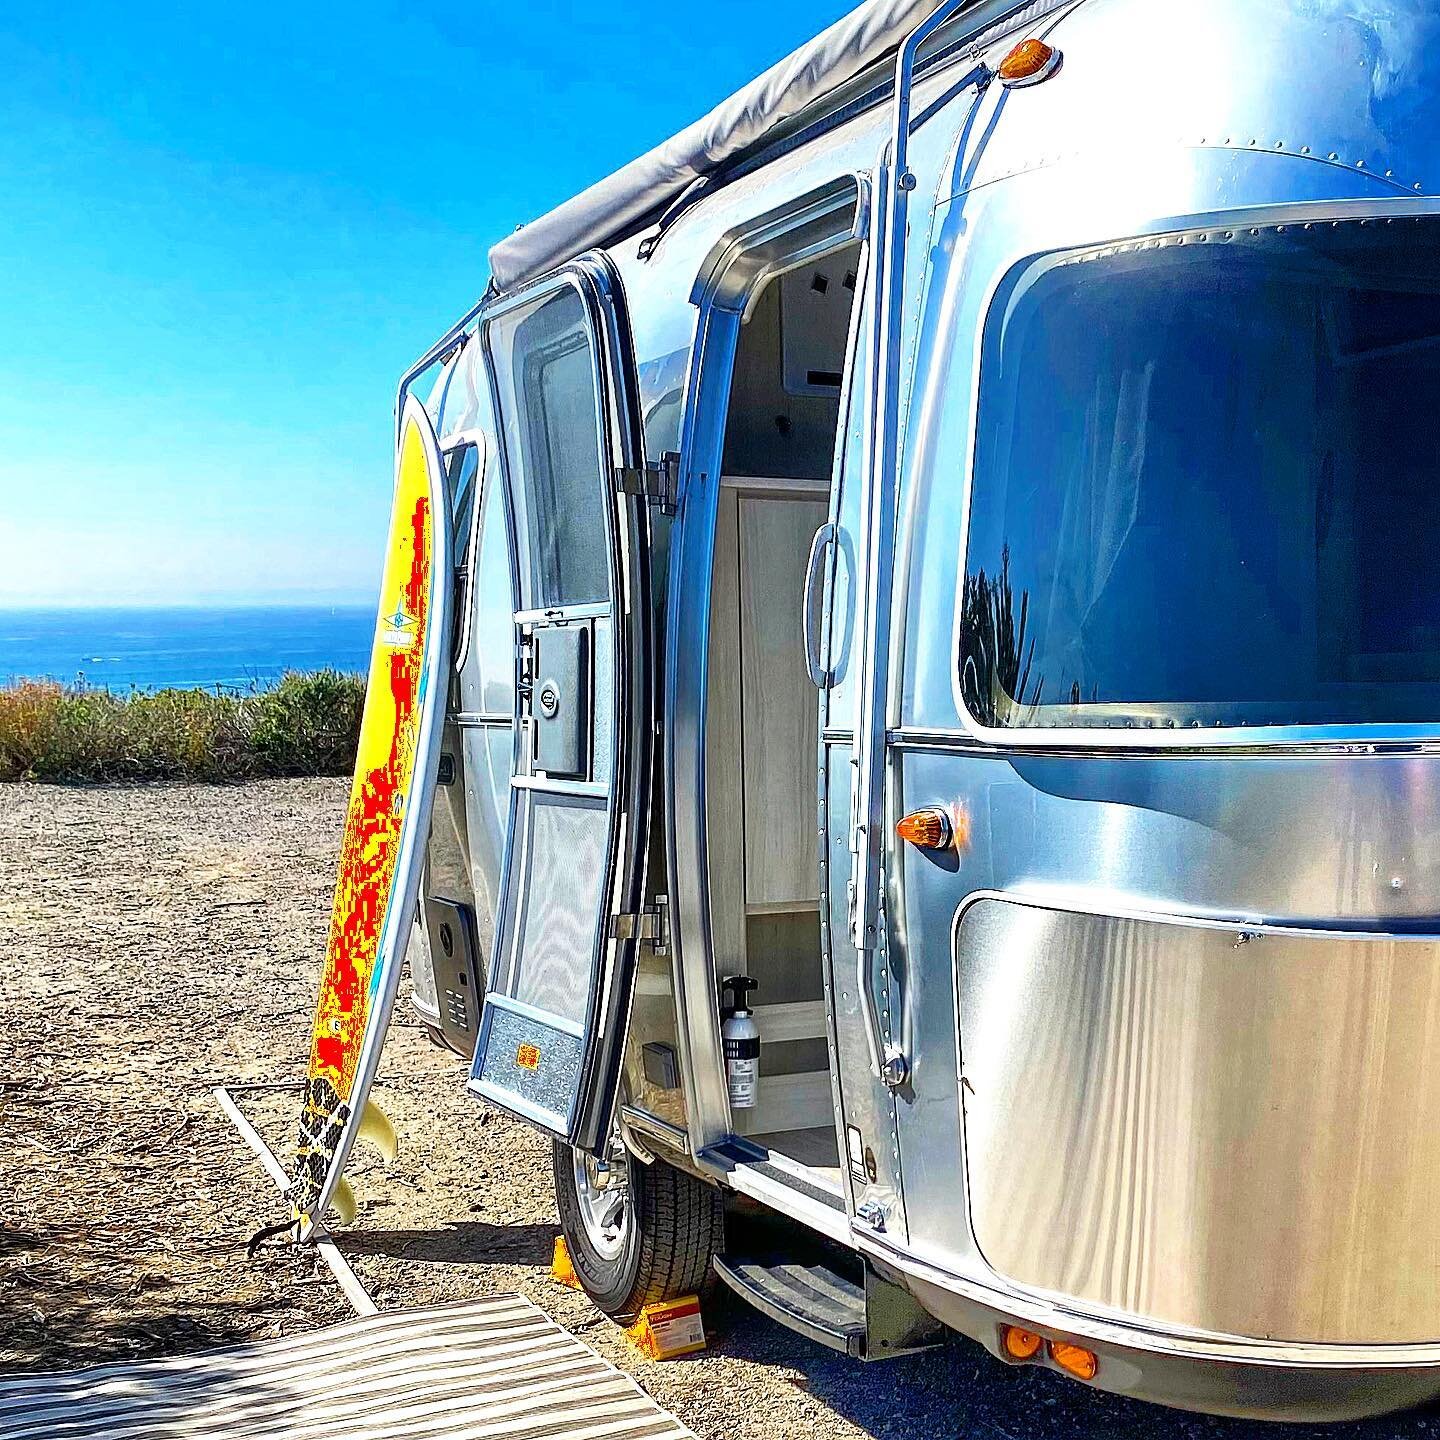 This is the plan for tomorrow morning. #rvshare #outdoorsy #california #californiawilderness #glamping #glampingcalifornia #glampers #glamperscalifornia #glampersca #rvtravel #airstream #traveltrailer #californiatravel #camping #californiacamping #ca